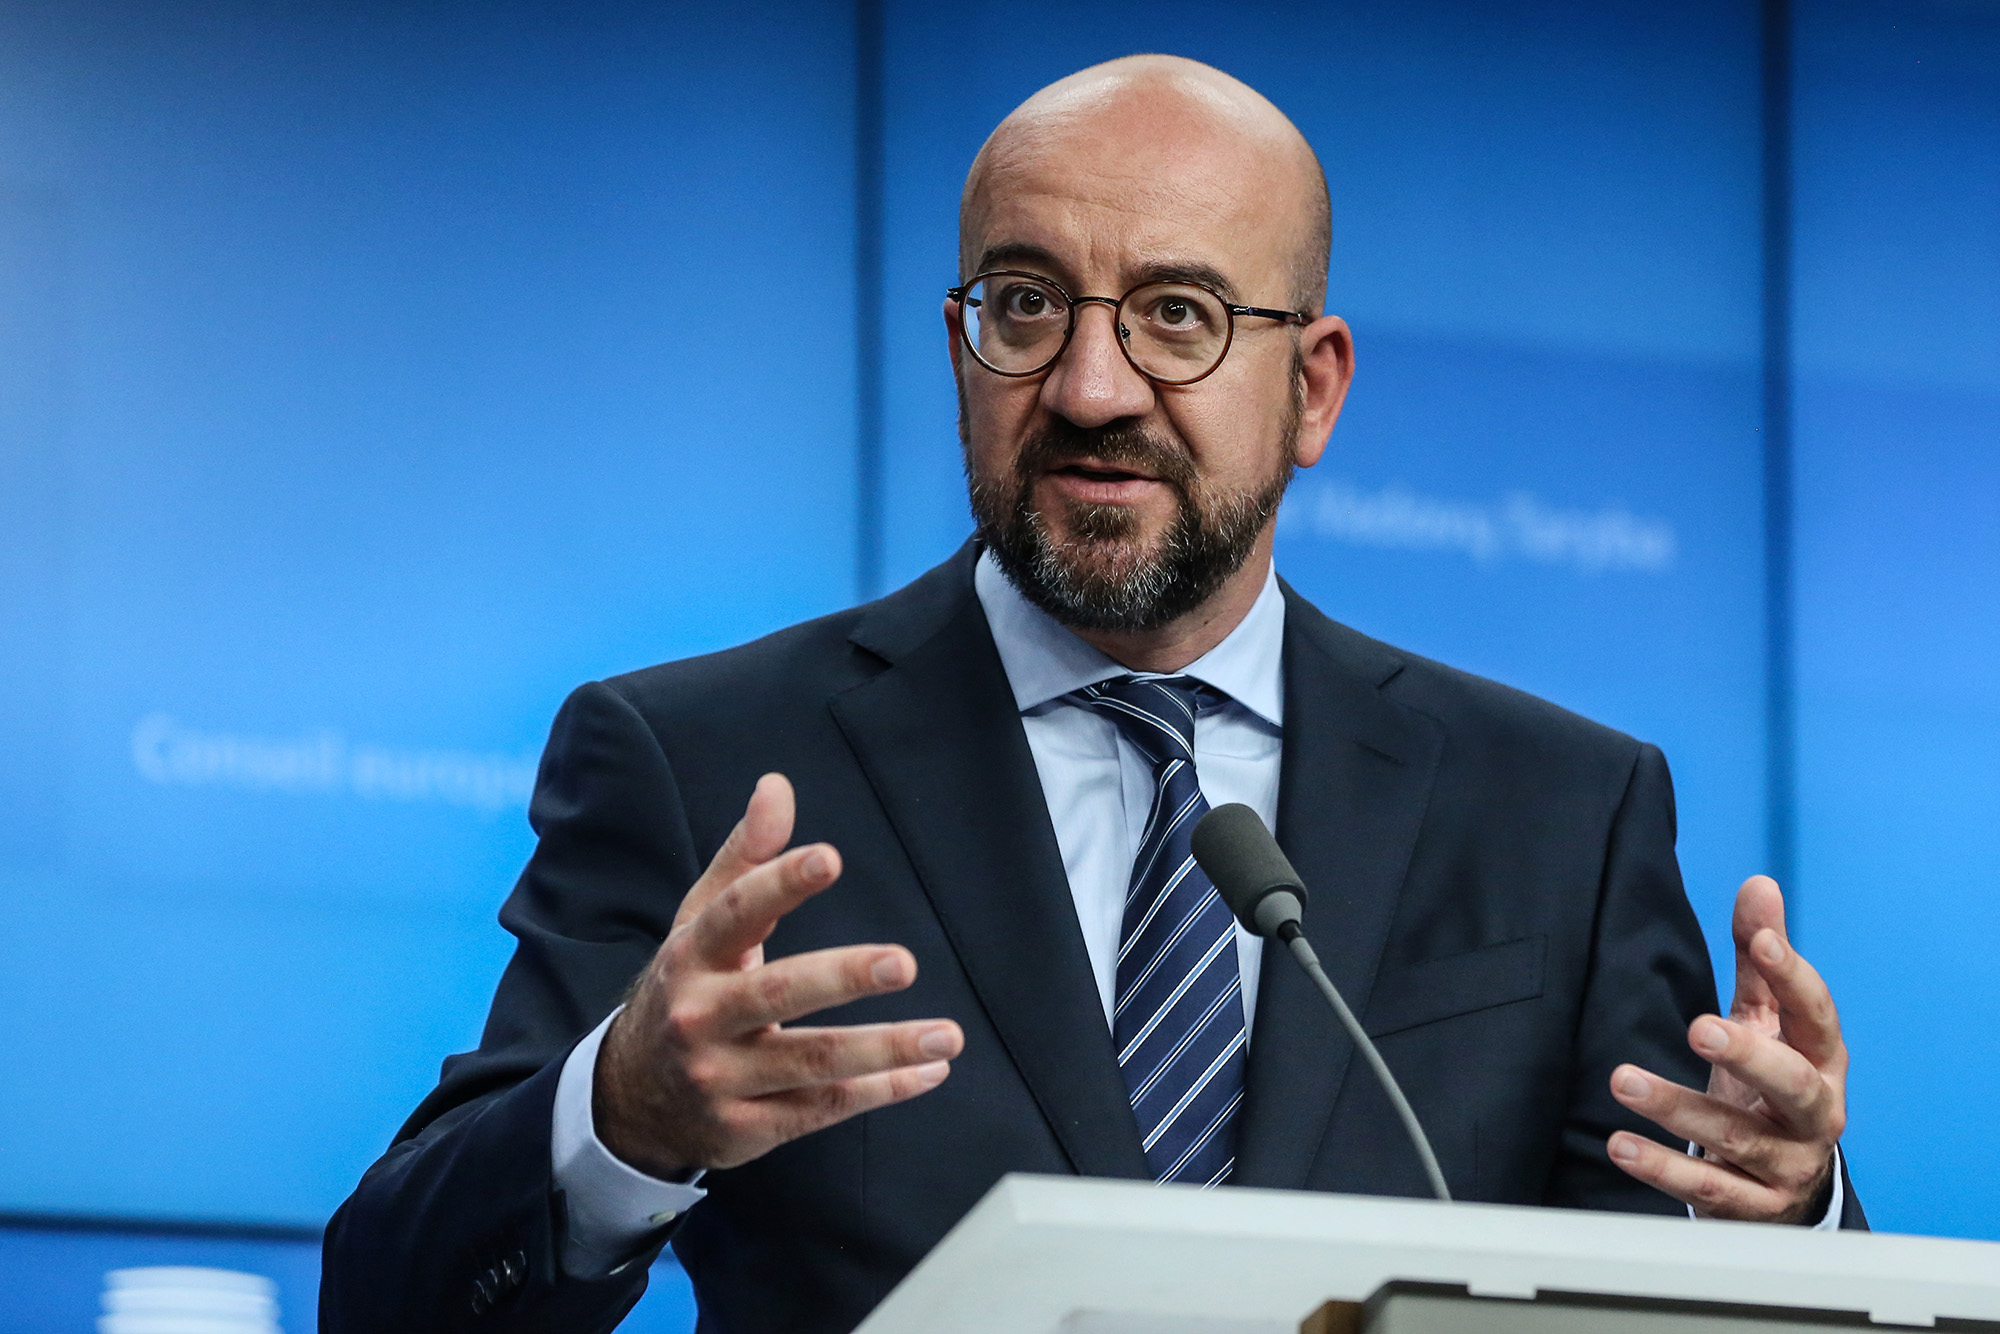 Charles Michel, president of the European Council, speaks at the European Council headquarters in Brussels, Belgium, on May 31.